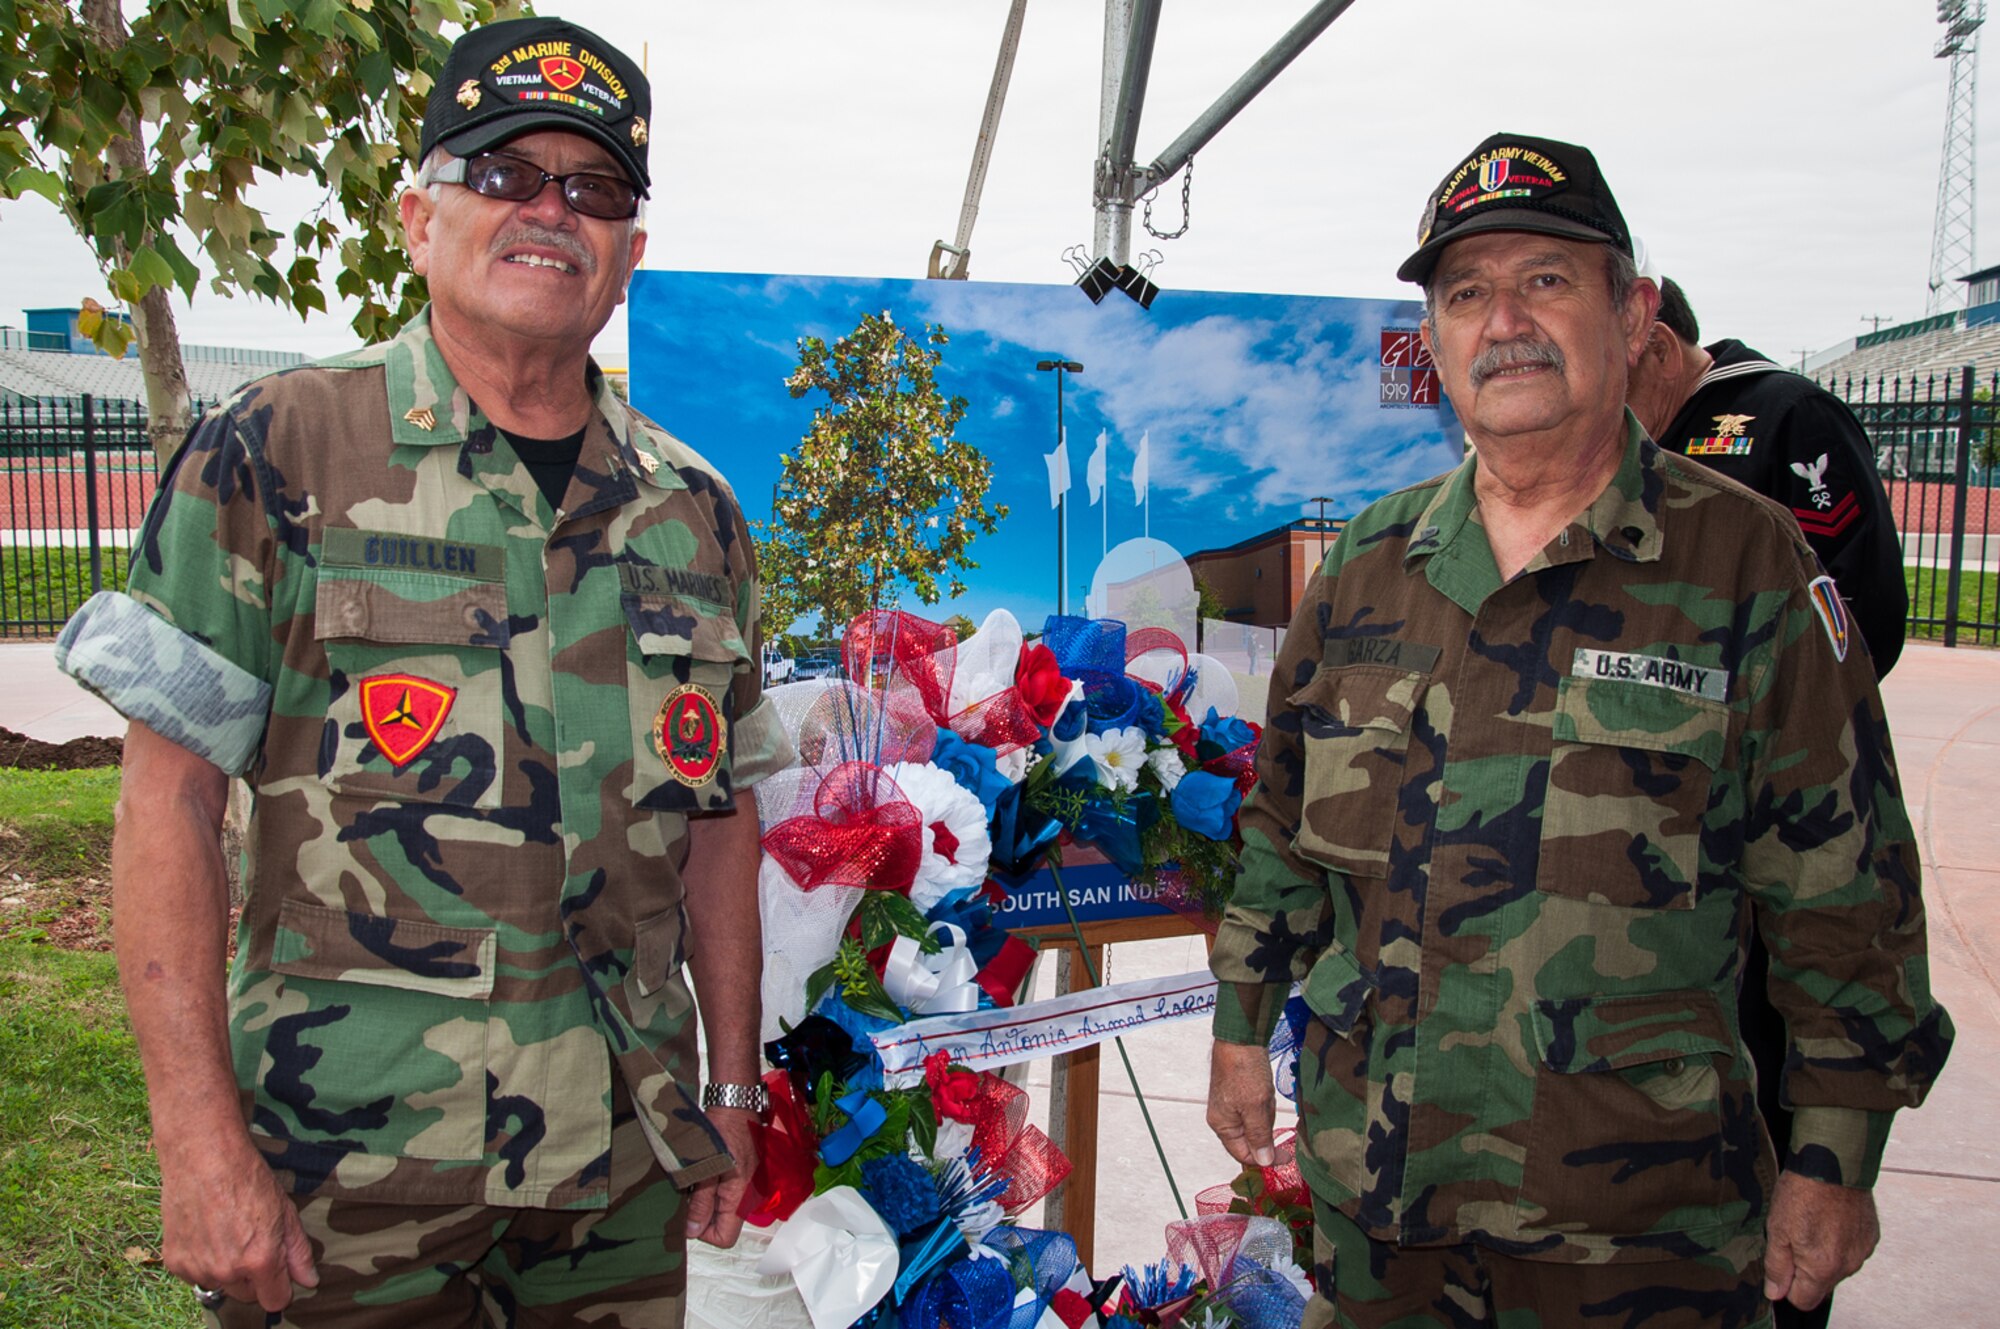 Manuel Guillen, a veteran who was one of the first Marines to land in Vietnam, and Humberto Garza, an Army veteran who served in the Vietnam War, stand next to the winning memorial design at a groundbreaking ceremony at South San Antonio High School, Nov. 11. The memorial is meant to commemorate native San Antonio veterans, from across the military services, who have lost their lives serving their country. (U.S. Air Force photo by 1st Lt. Jose R. Davis)